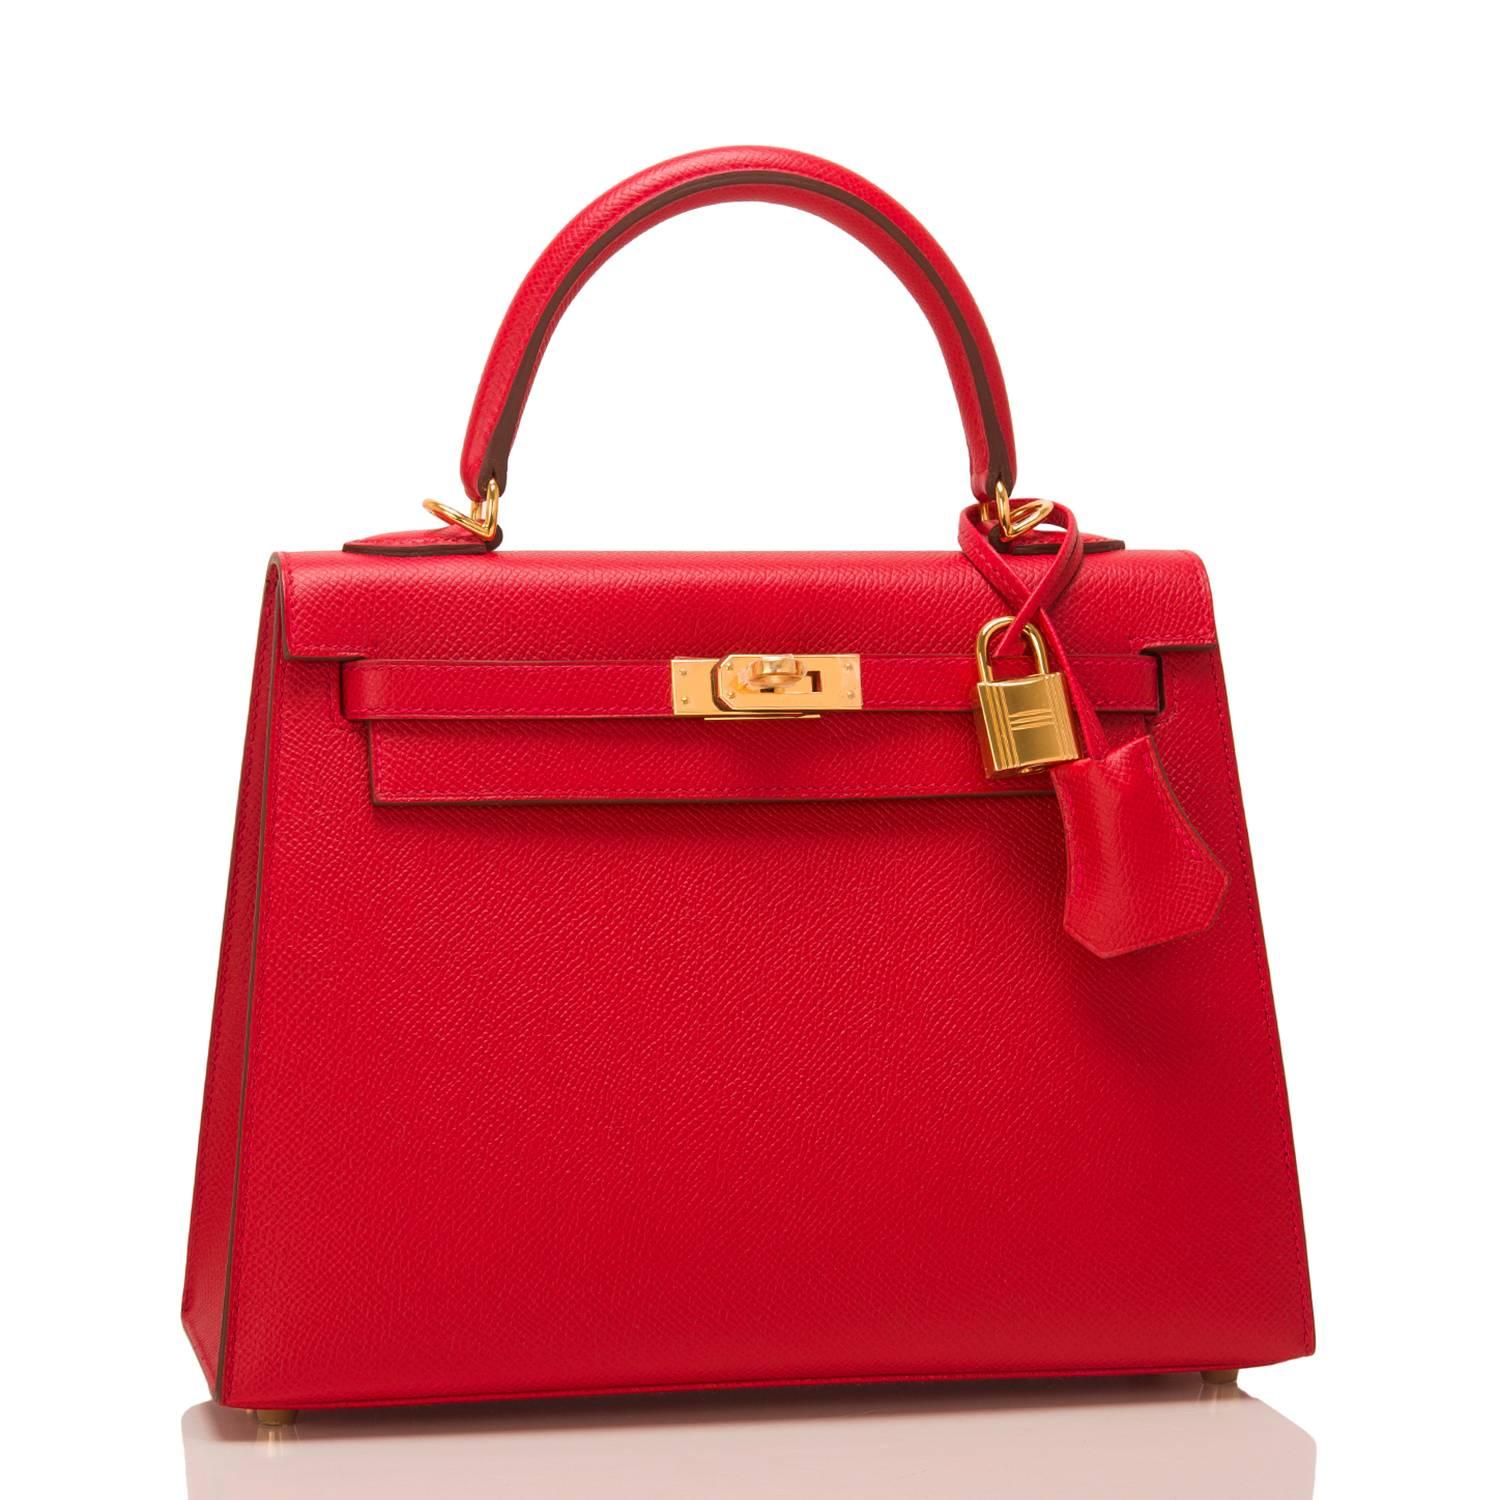 Hermes Rouge Casaque Sellier Kelly 25cm of epsom leather with gold hardware.

This Sellier Kelly has tonal stitching, a front toggle closure, a clochette with lock and two keys, a single rolled handle and a removable shoulder strap.

The